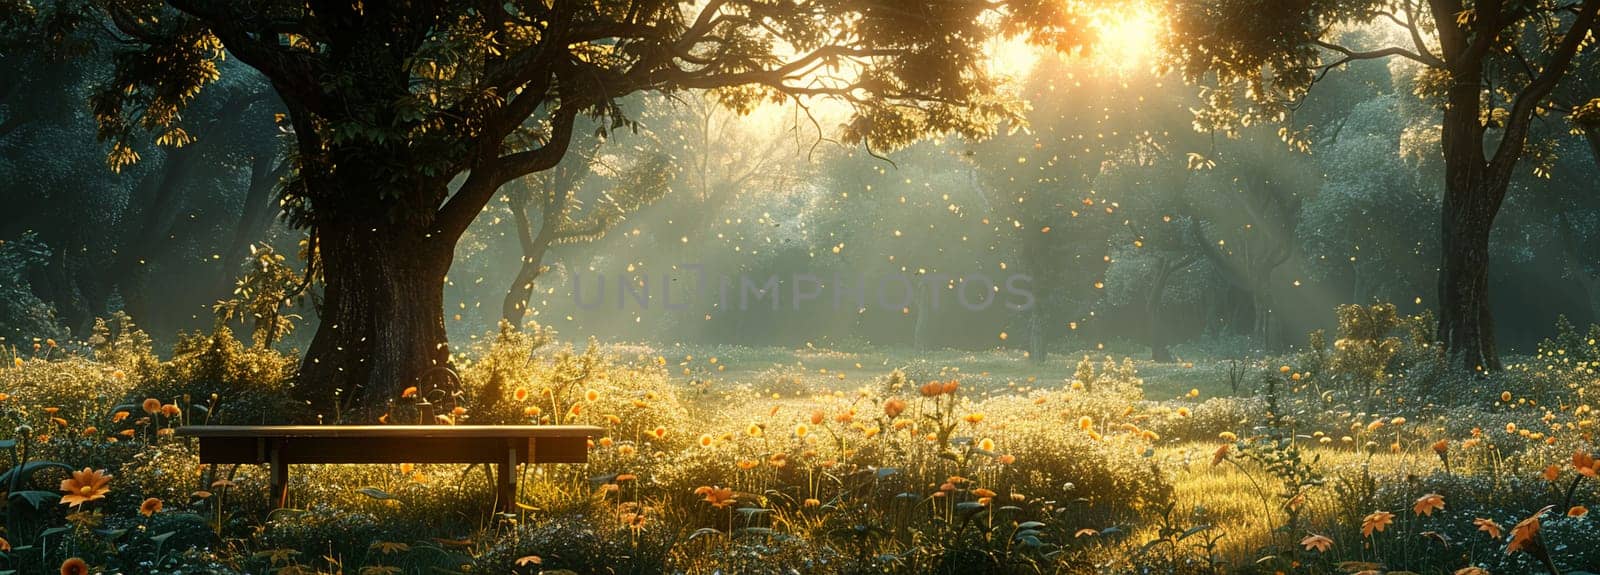 Idyllic forest scene featuring lush greenery, wildflowers, and warm sunlight filtering through trees, evoking tranquility and natural beauty.